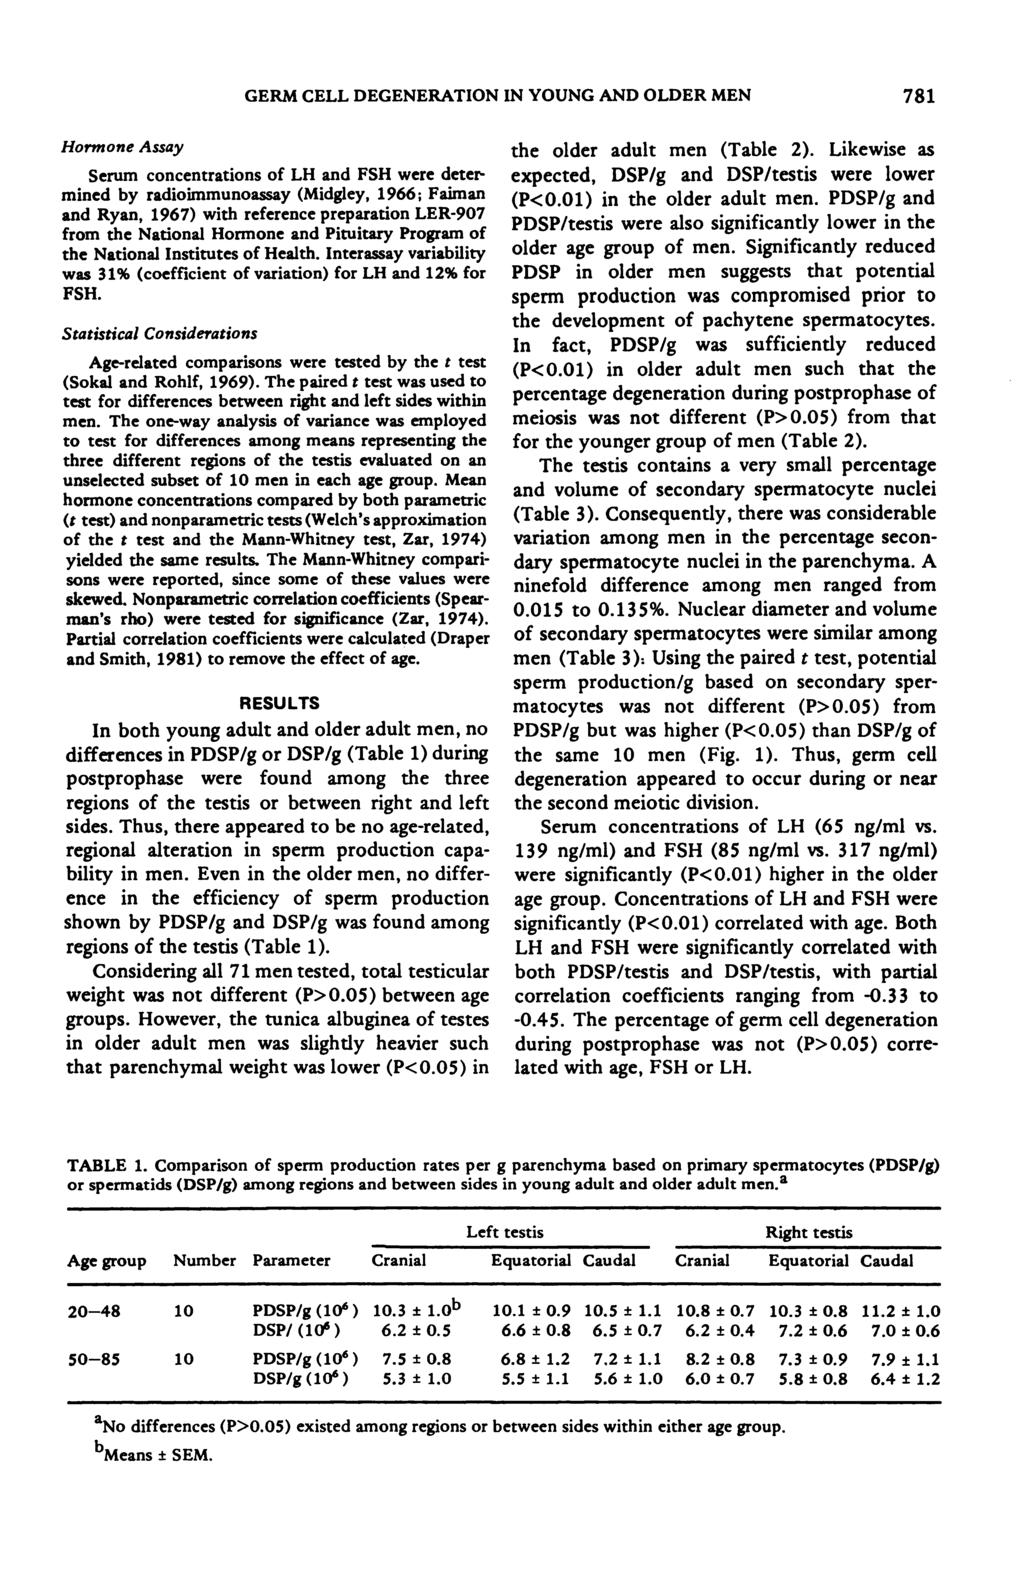 GERM CELL DEGENERATION IN YOUNG AND OLDER MEN 781 Hormone Assay Serum concentrations of LH and FSH were determined by radioimmunoassay (Midgley, 1966; Faiman and Ryan, 1967) with reference